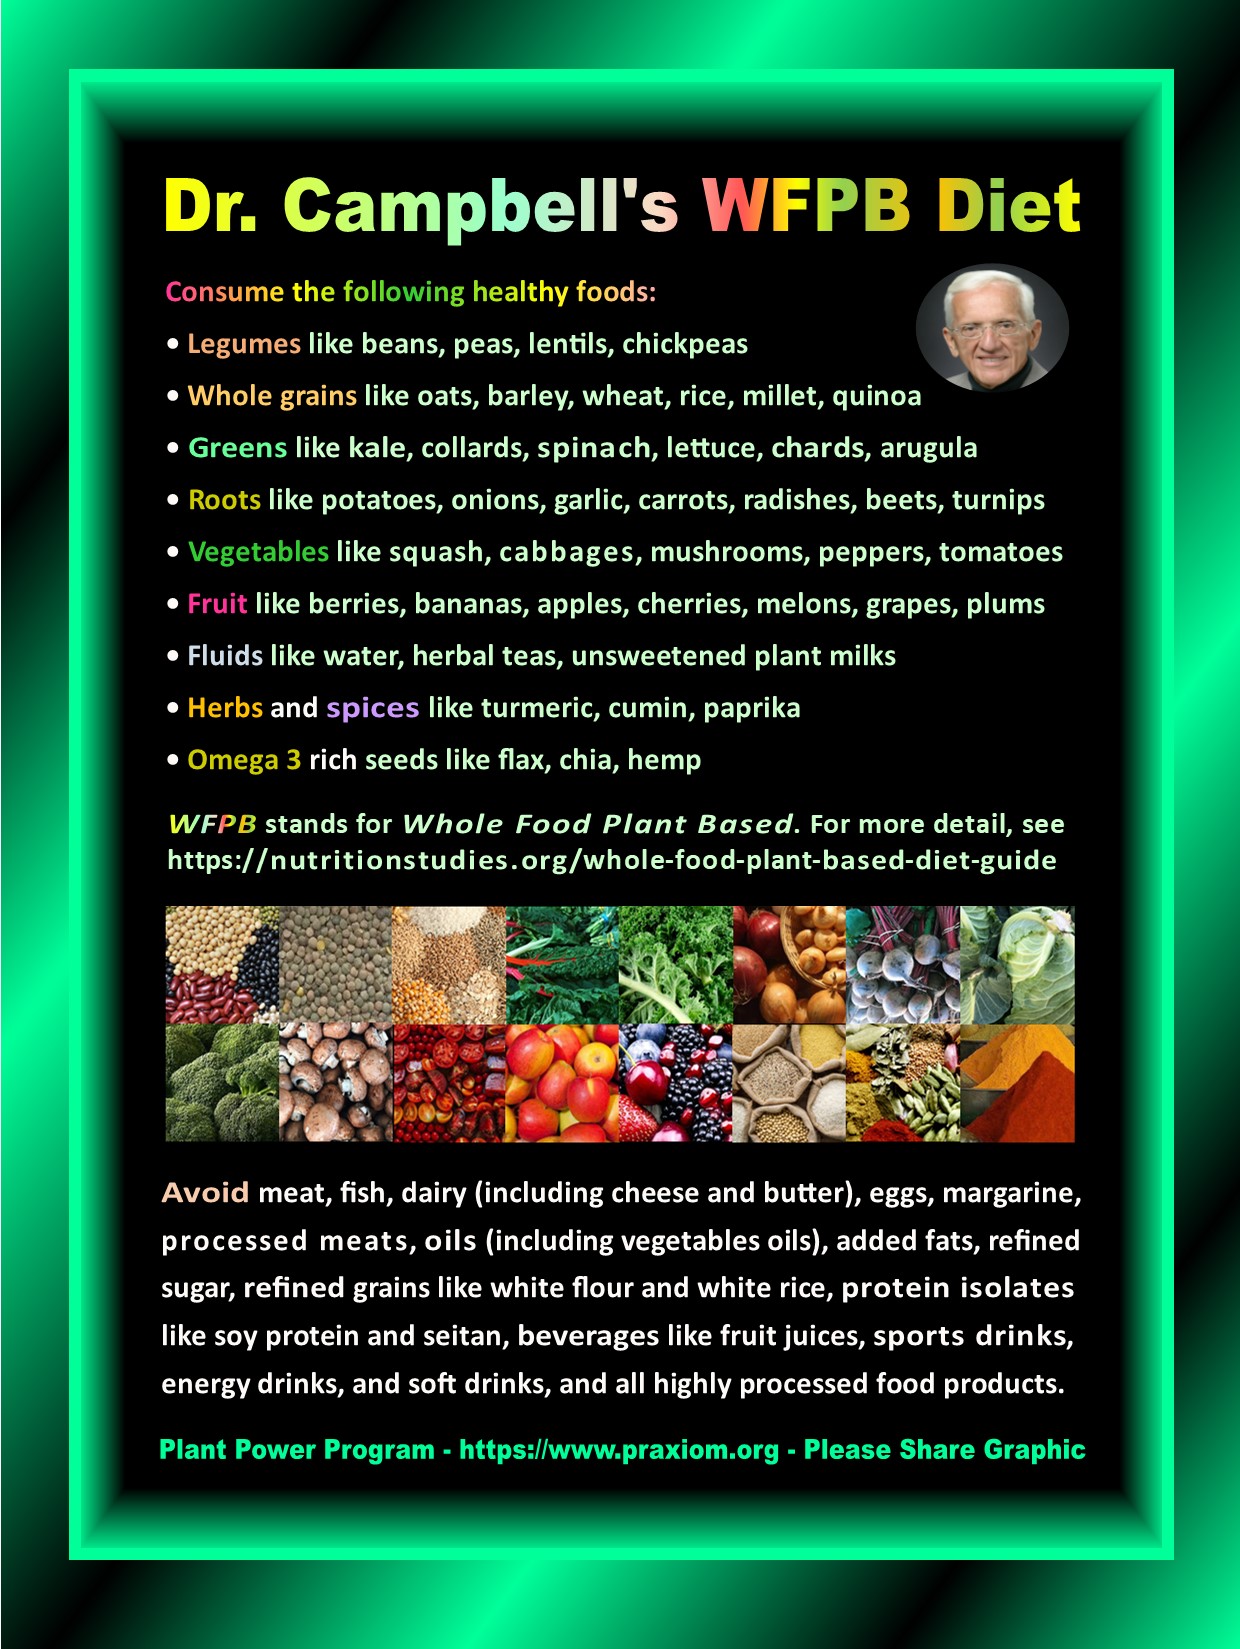 Dr. Campbell's WFPB Diet